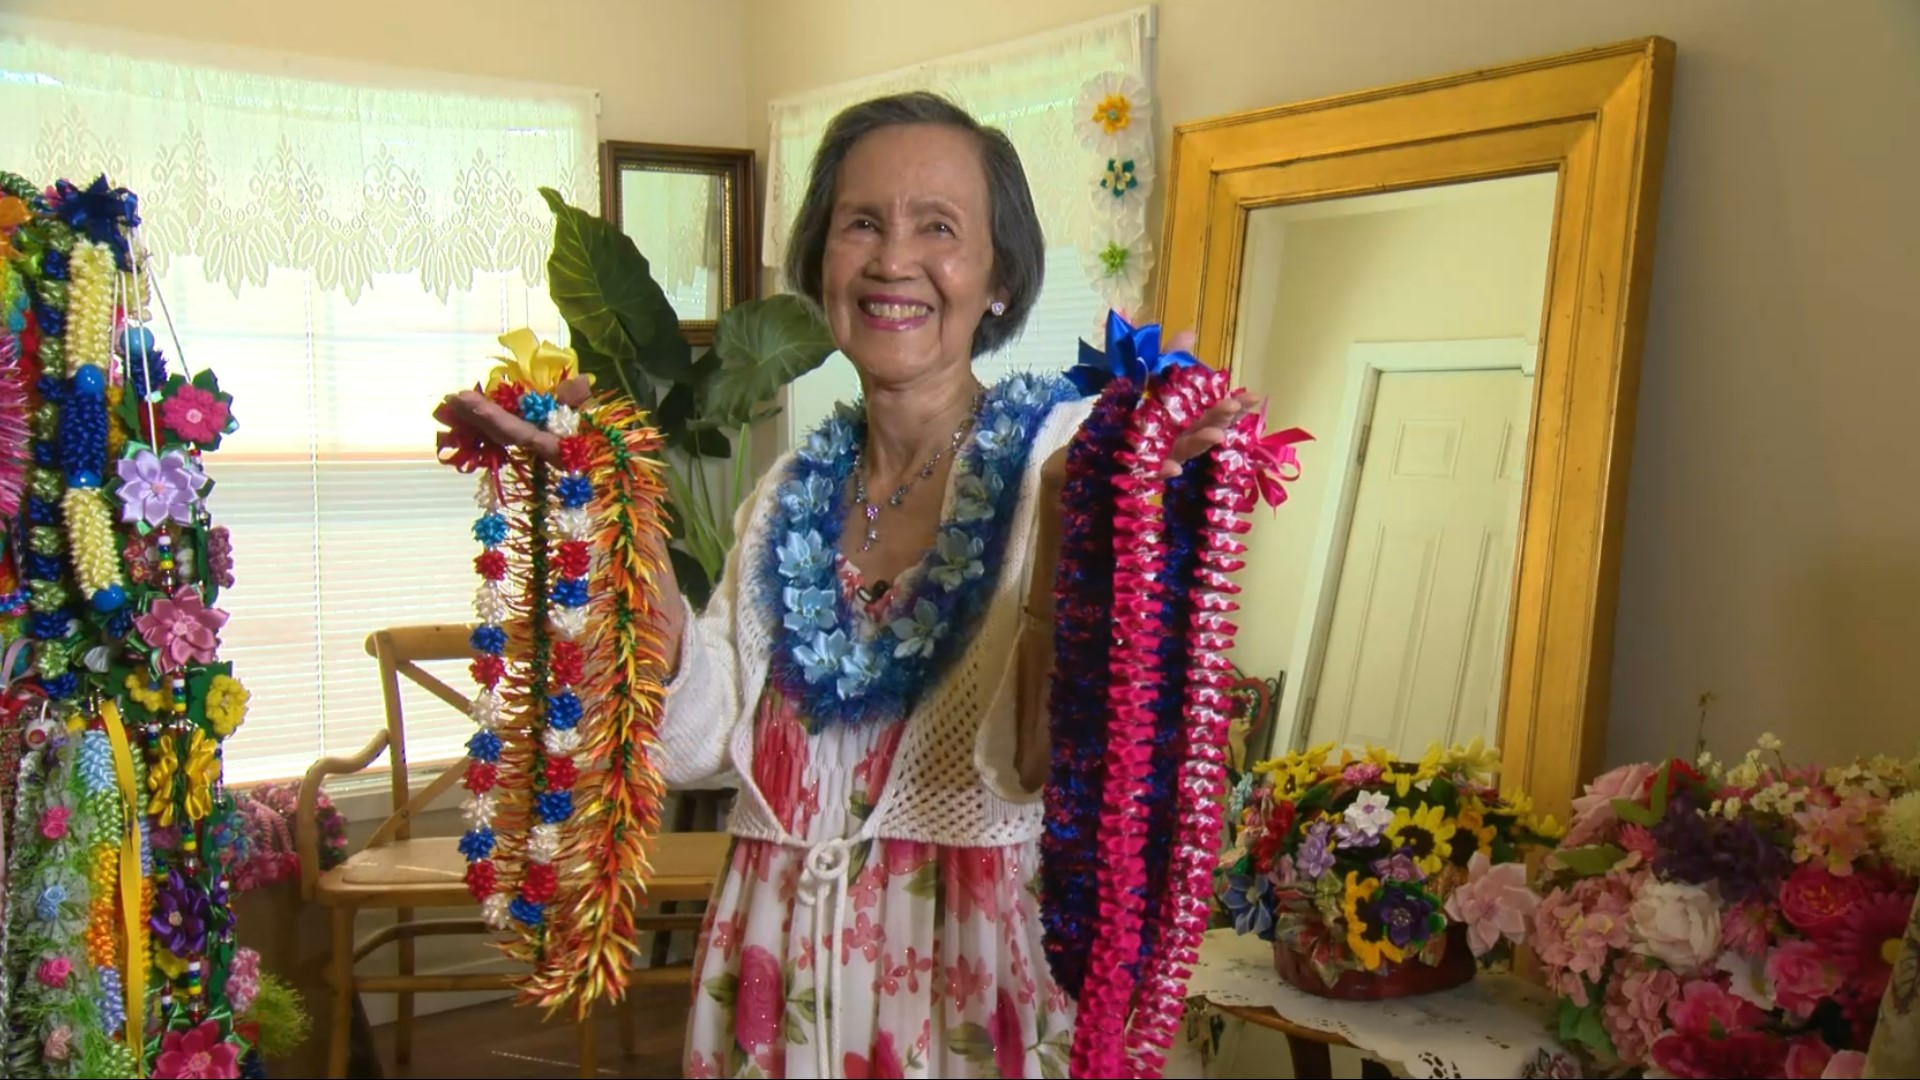 This 86-year-old spreads joy and stays young with a colorful hobby.